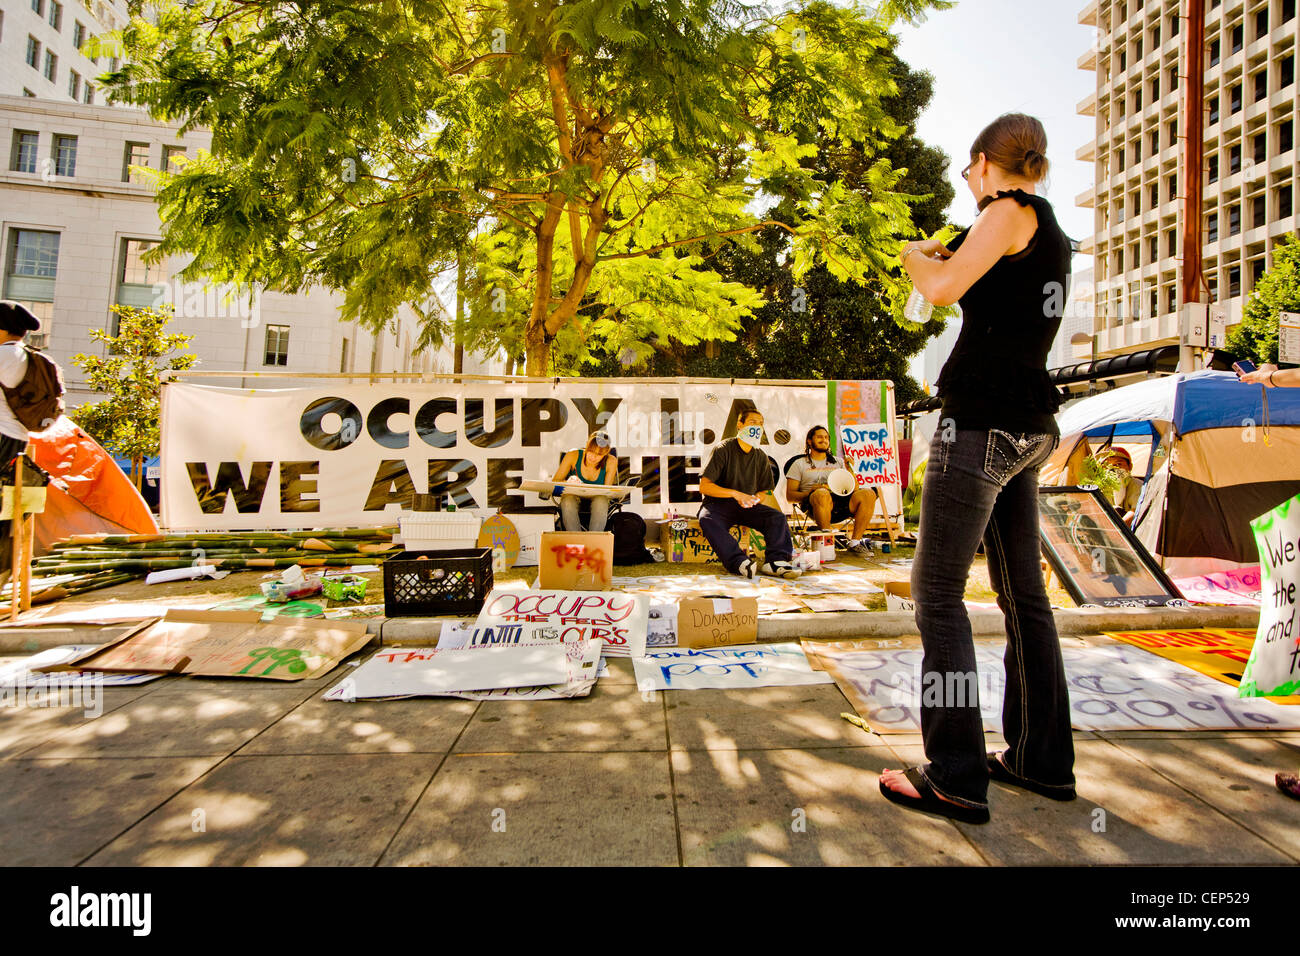 A large sign expresses the We-Are-the-99% anti-capitalism sentiments of Occupy Wall Street protesters at Los Angeles City Hall. Stock Photo